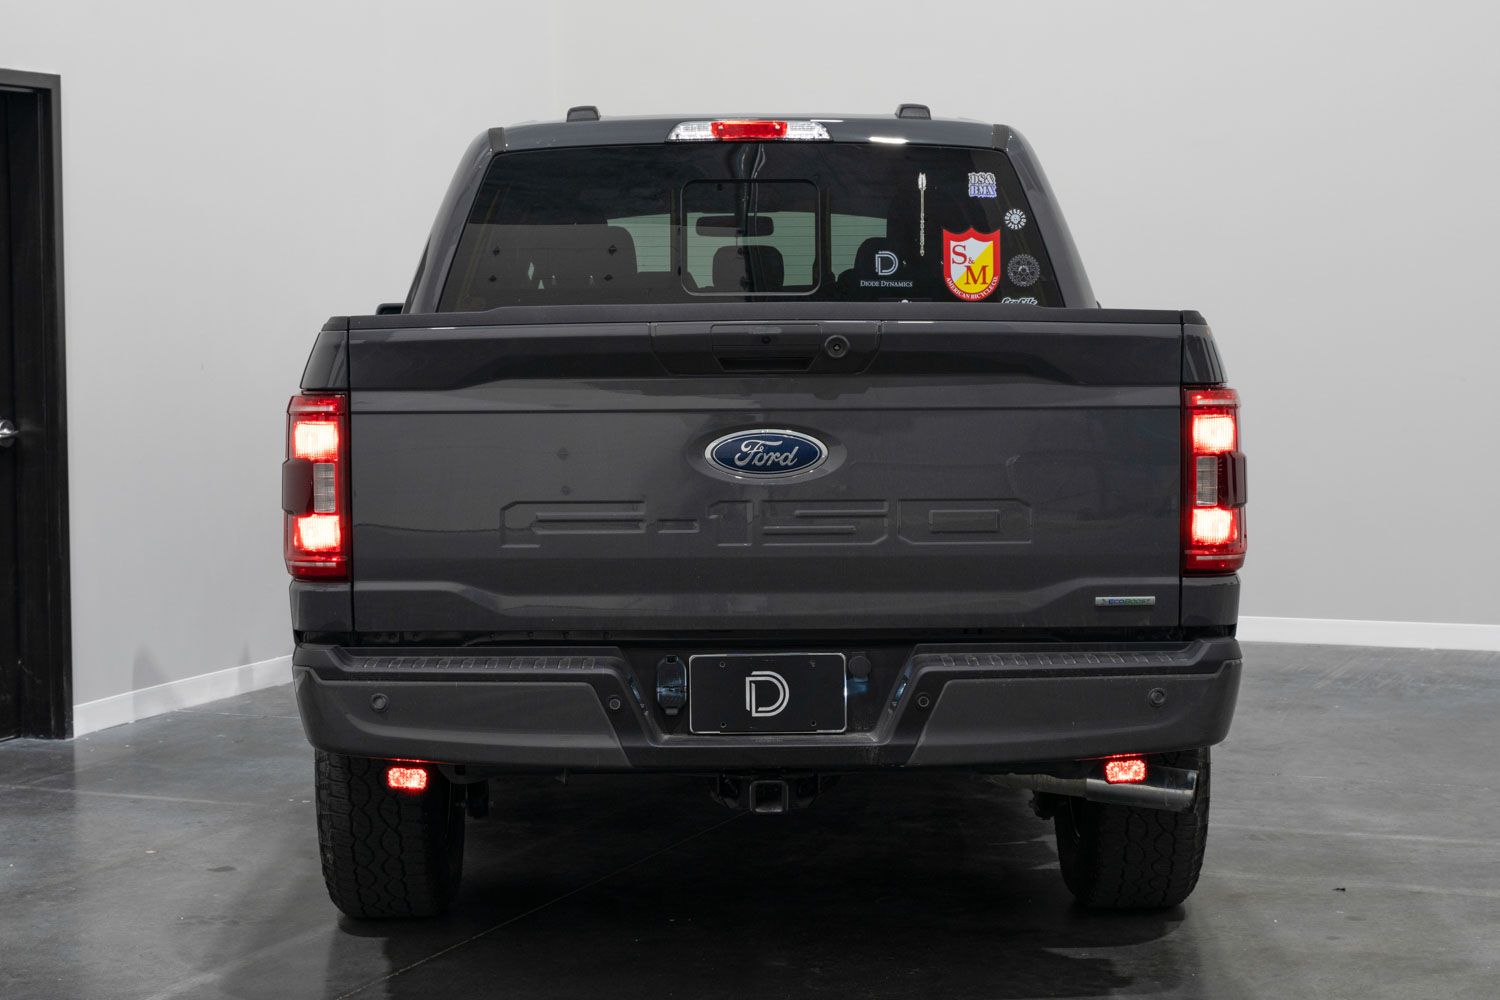 Stage Series Reverse Light Kit for 2021-2023 Ford F-150-